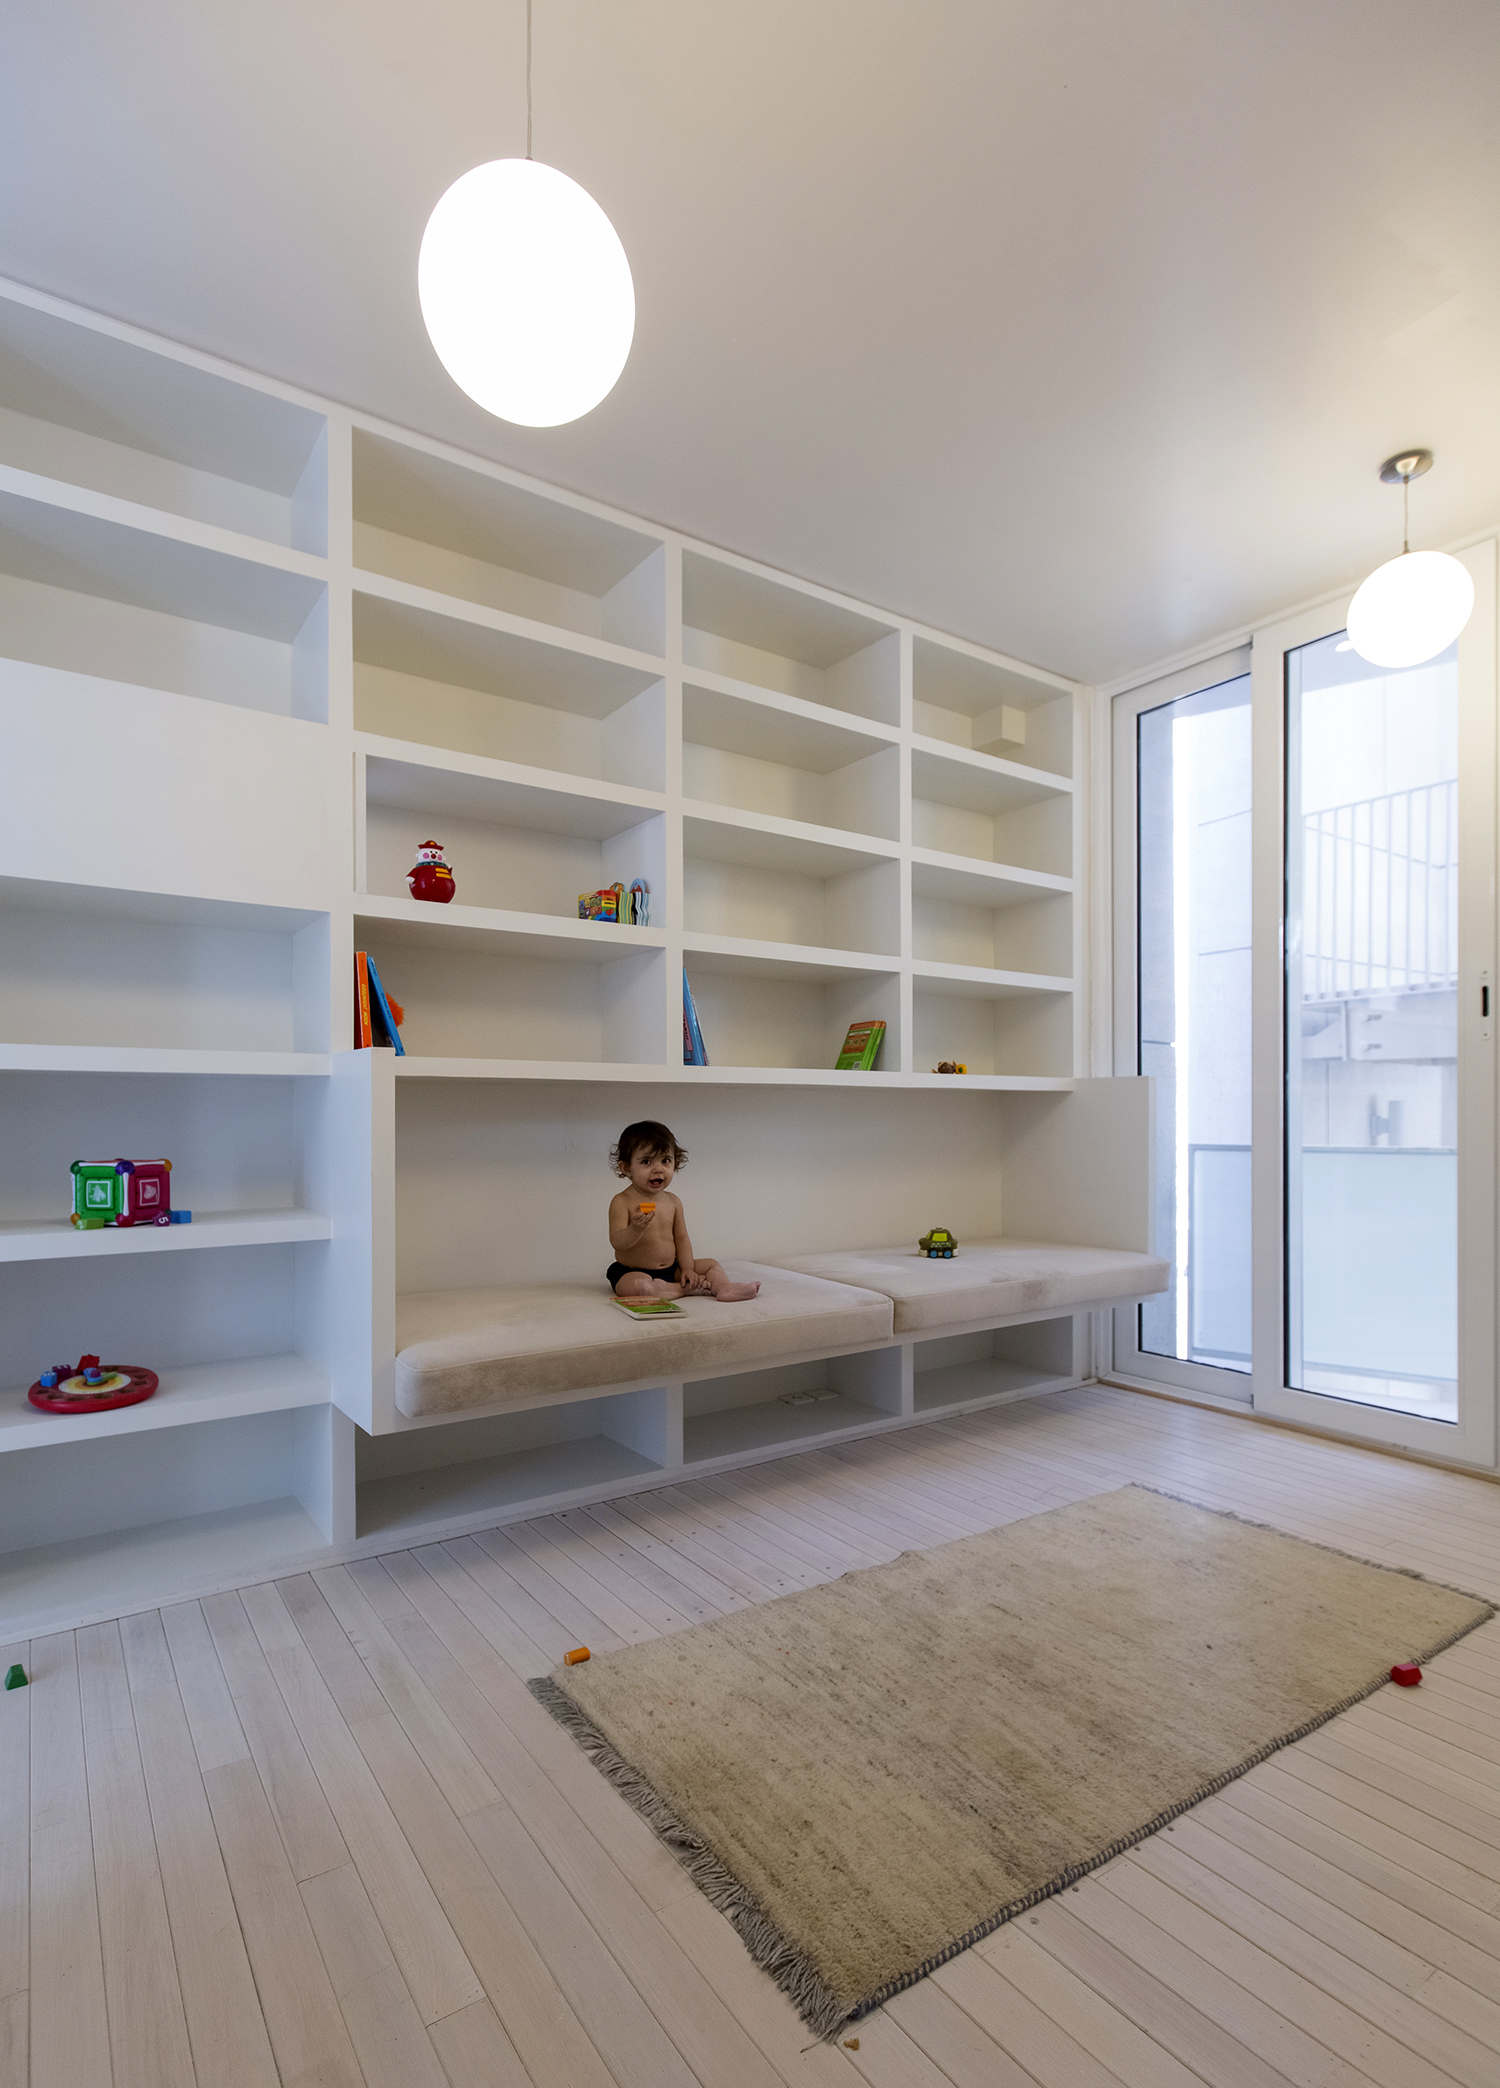 Interior view of the kids’ bedroom on the third floor illustrating the shelving system, the embedded kids’ bed, and how the staircase provides ample natural light via the light shaft